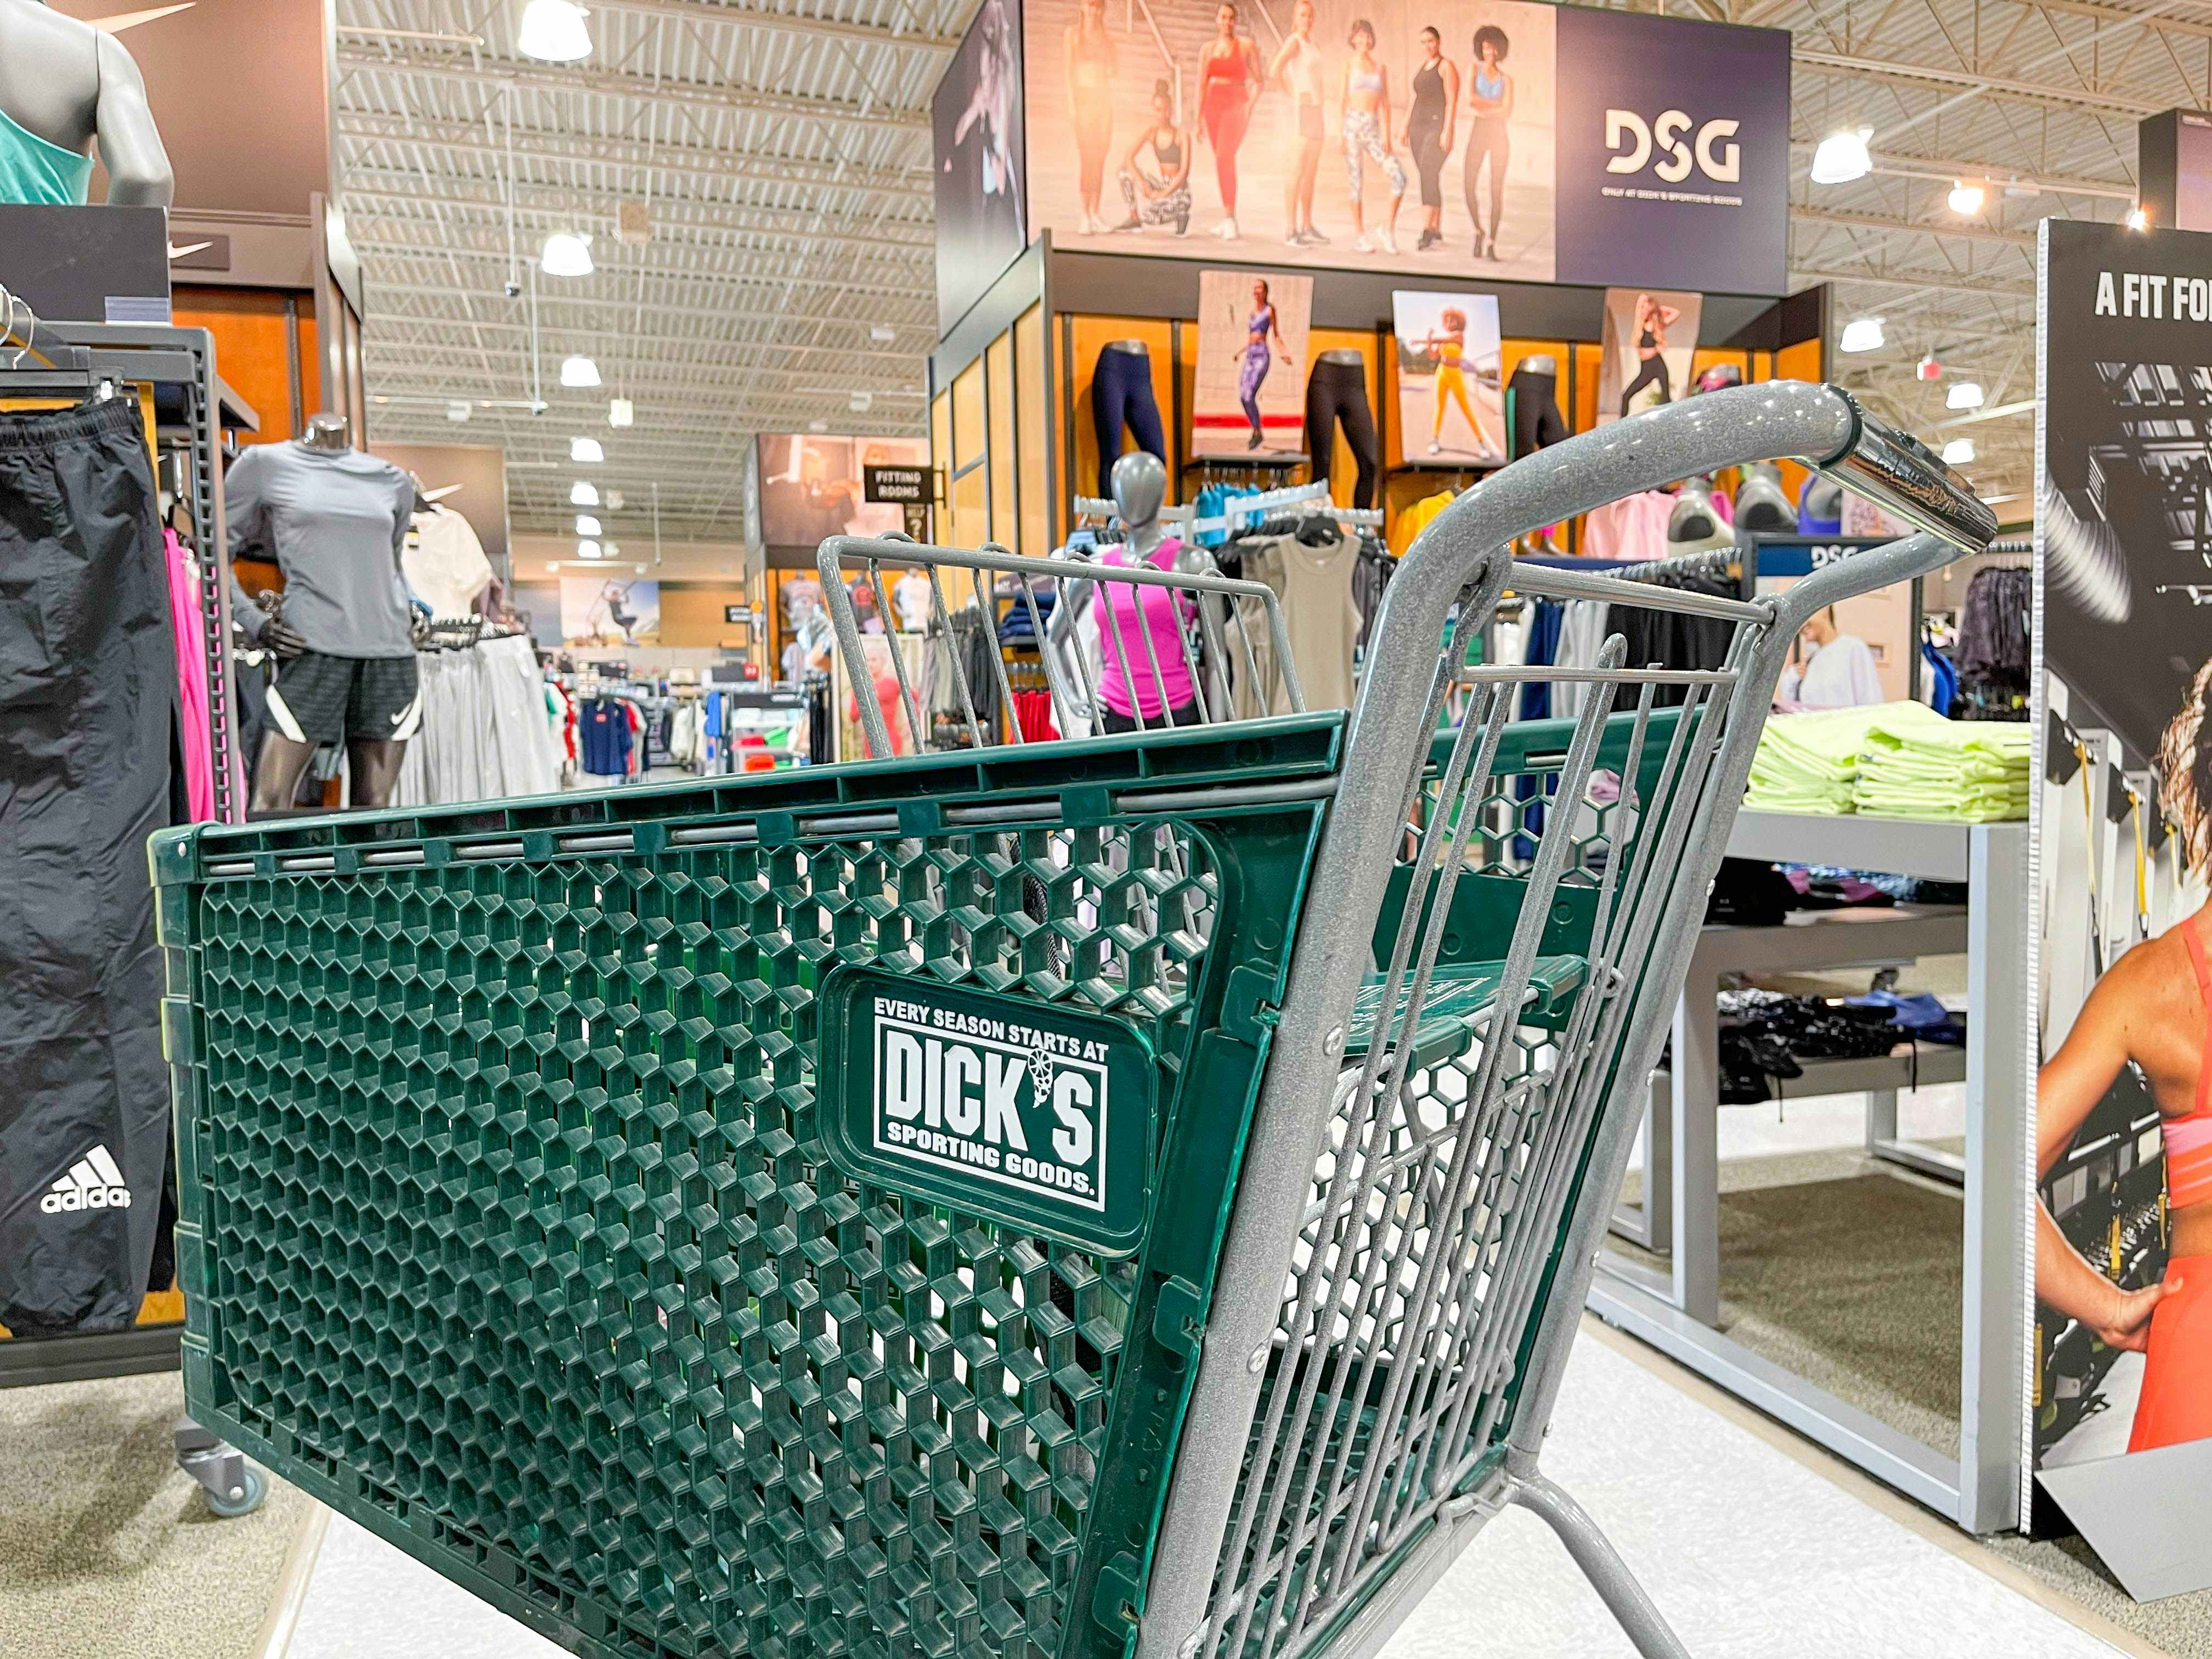 A Dick's Sporting Goods shopping cart in the middle of an aisle at Dick's.